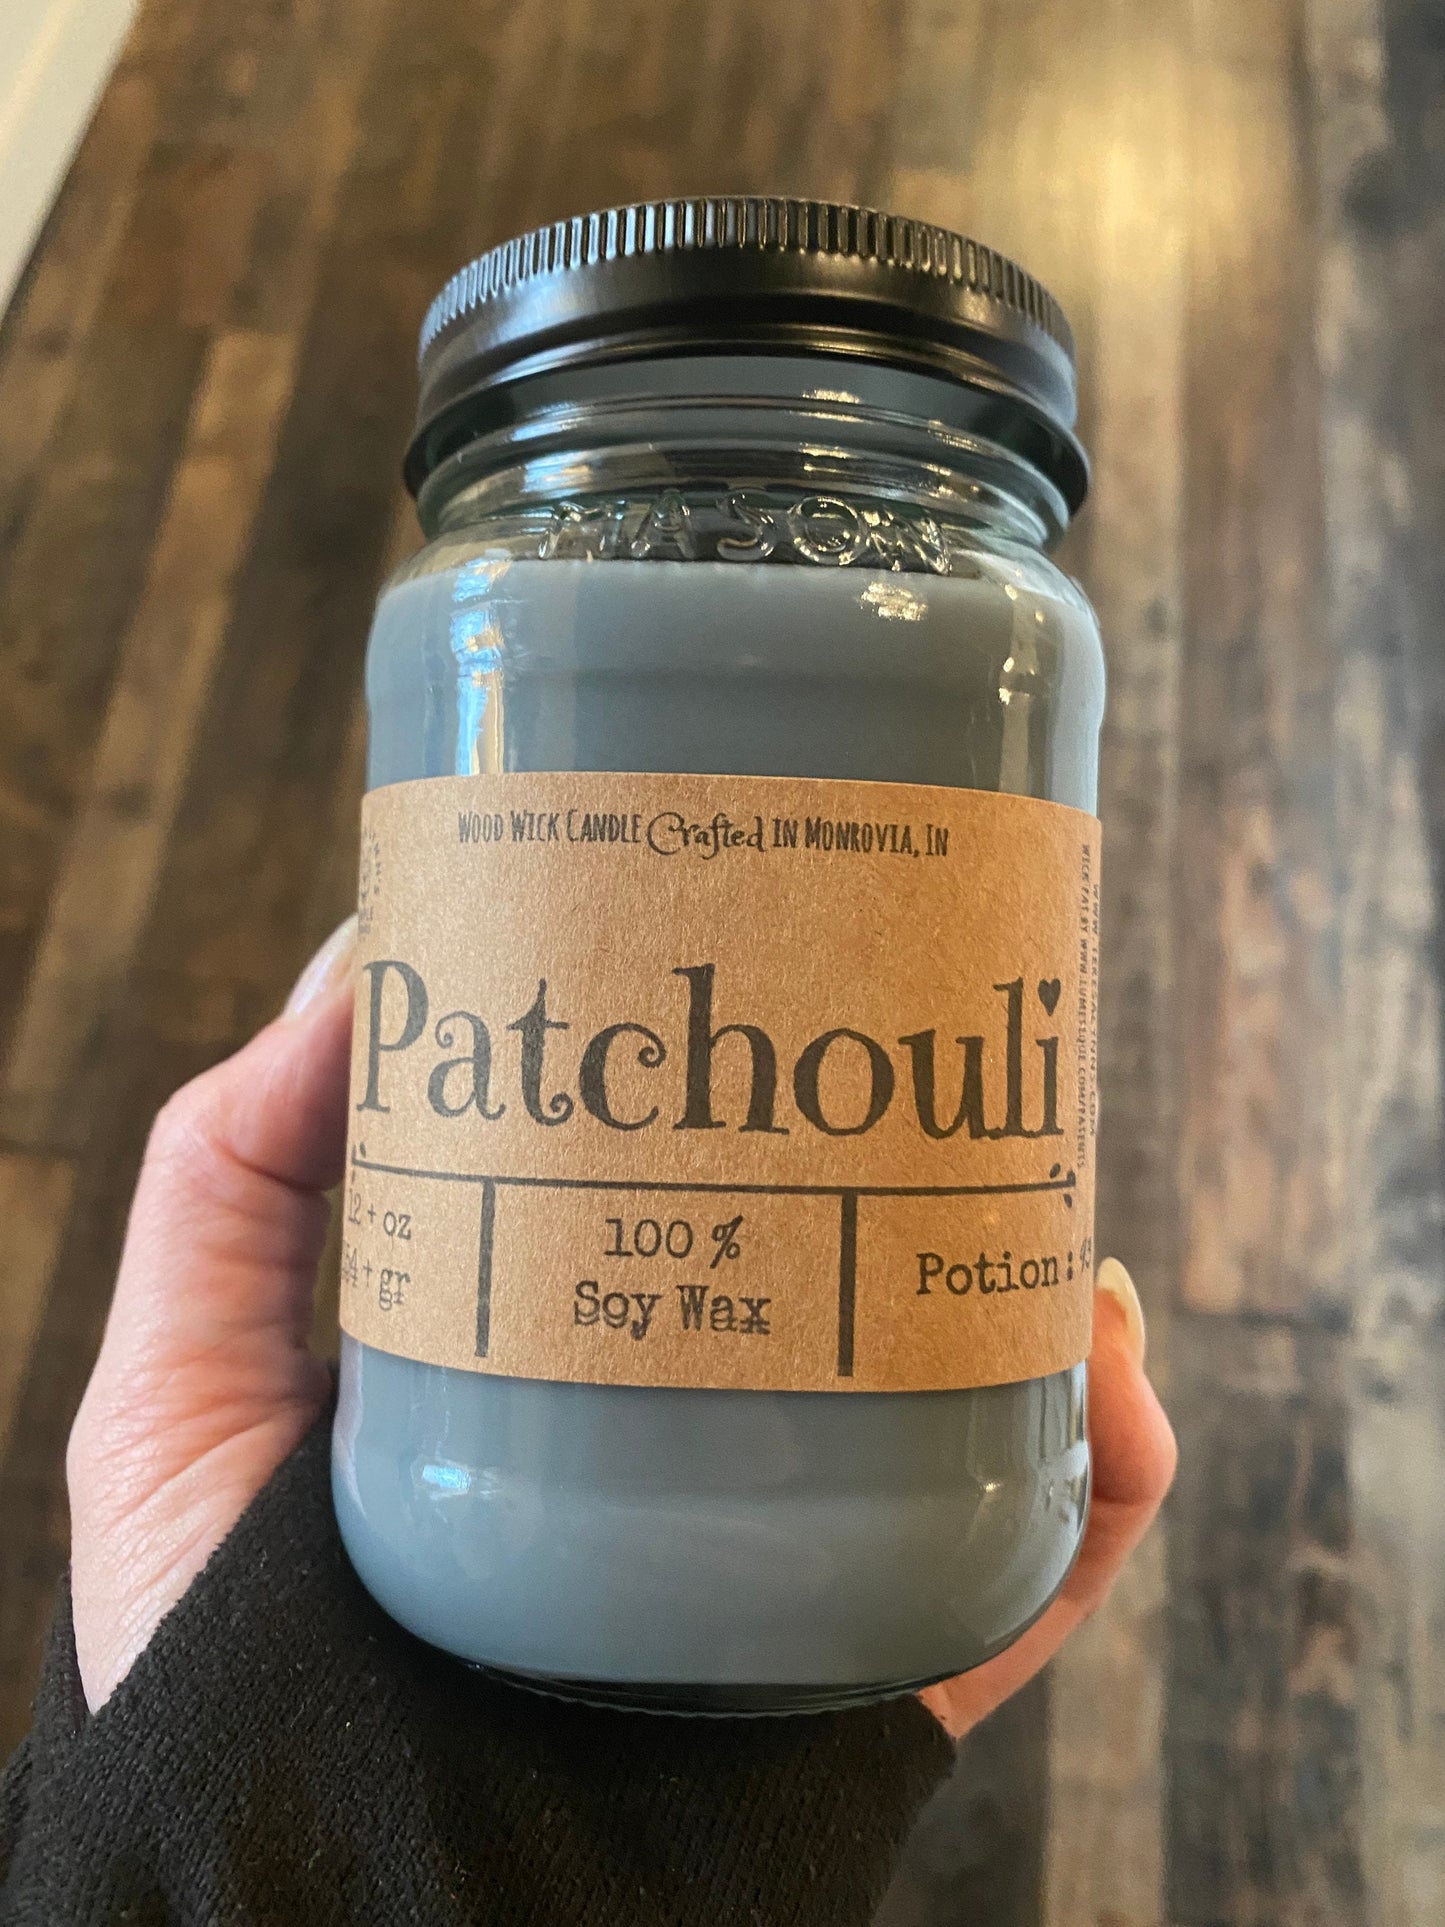 Patchouli candle, wooden wick, SOY WAX, candle, hippie, goddess, long burning candle, essential oil candle, incense, handmade, boho